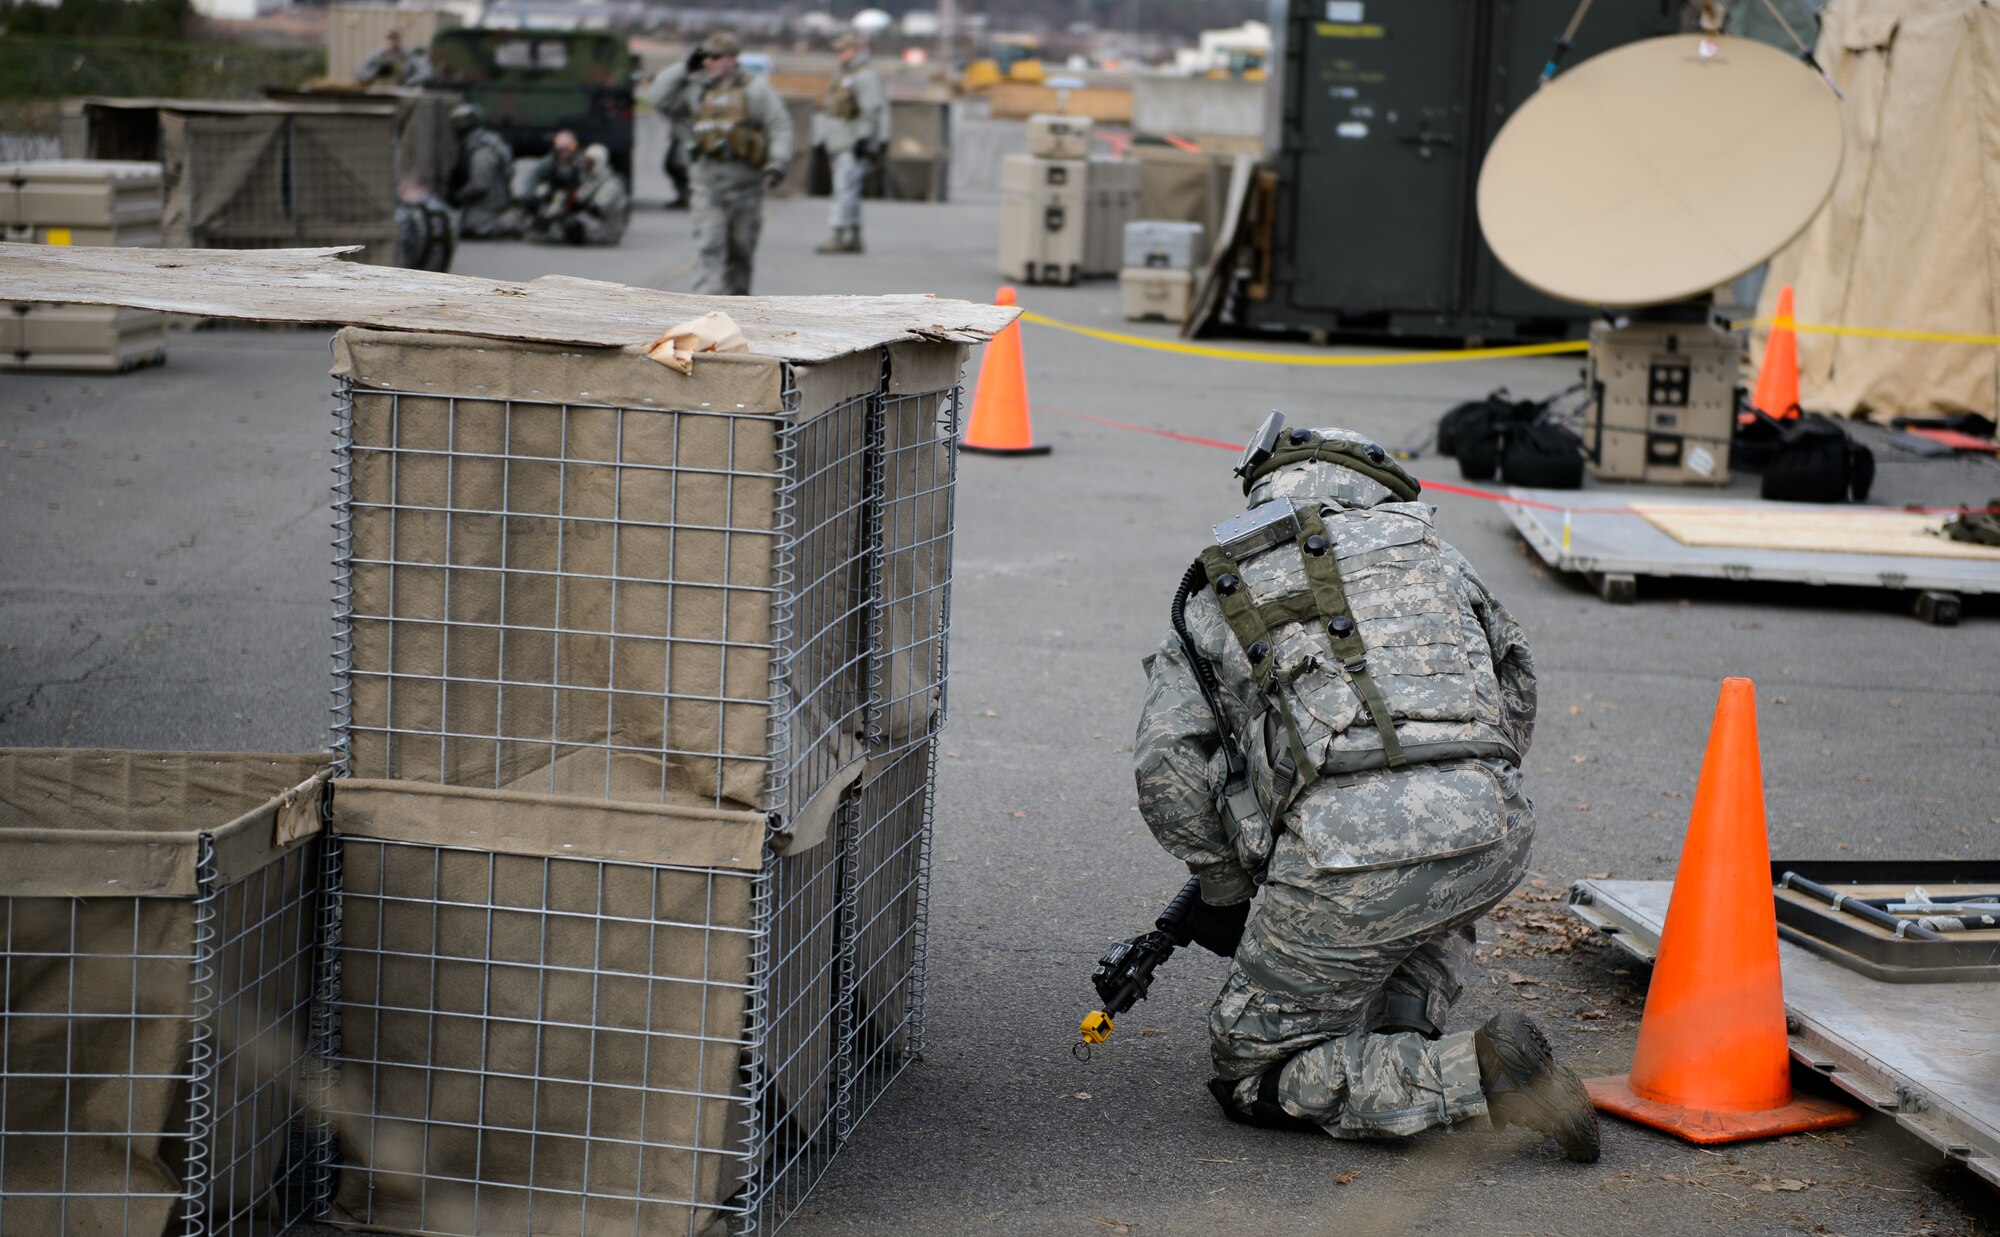 A 1st Combat Communications Squadron Airman takes cover as opposition forces begin their mock attack on trainees at Ramstein Air Base, Germany Feb. 12, 2016. The 1st CBCS constantly trains Airmen to hone their skills they may need while deployed to a variety of locations across the world. (U.S. Air Force photo/Staff Sgt. Armando A. Schwier-Morales)